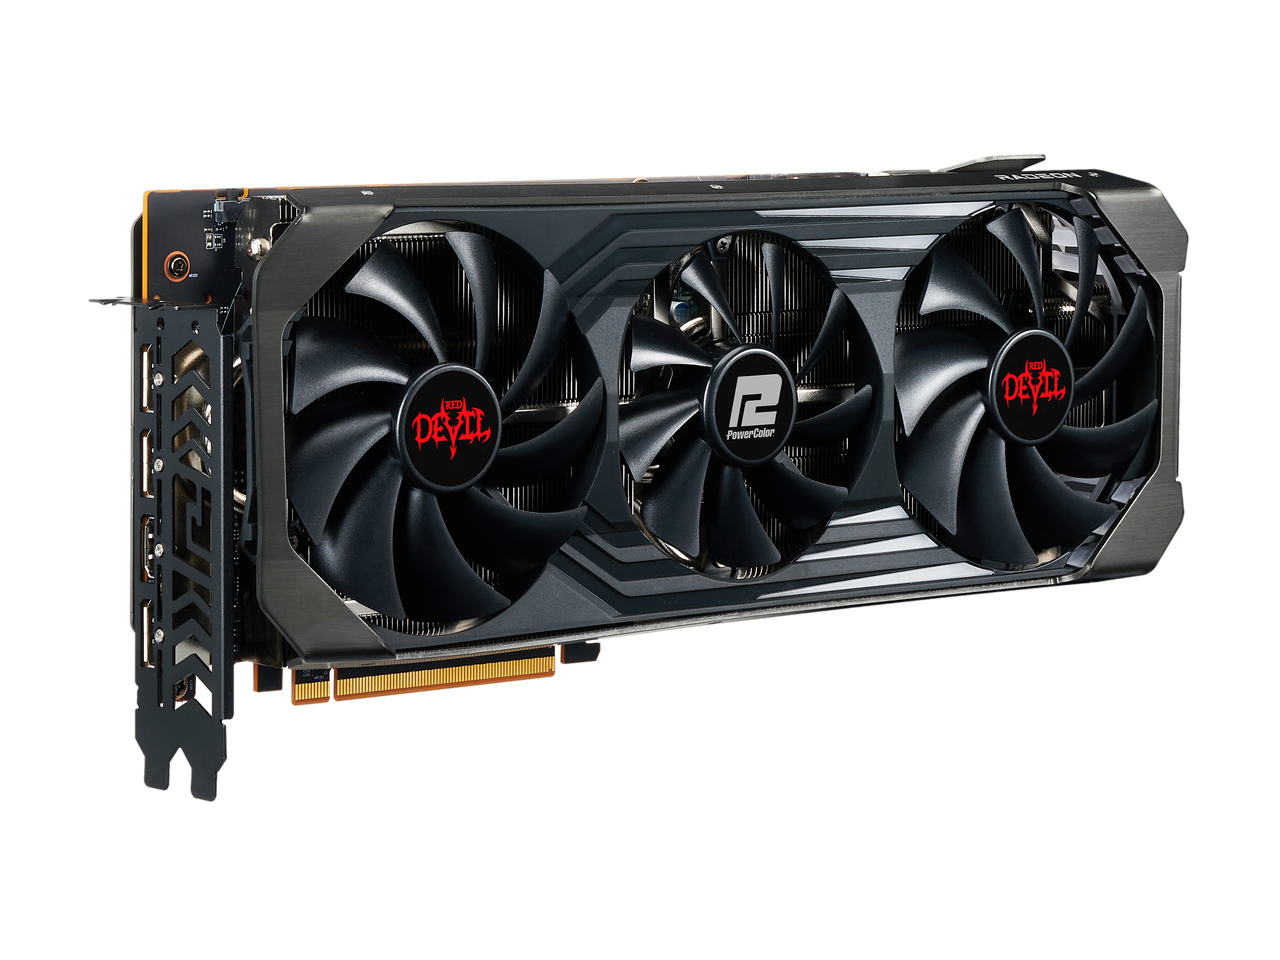 PowerColor Red Devil AMD Radeon RX 6700 XT Gaming Graphics Card with 12GB GDDR6 Memory, Powered by AMD RDNA 2, HDMI 2.1 (AXRX 6700XT 12GBD6-3DHE/OC)